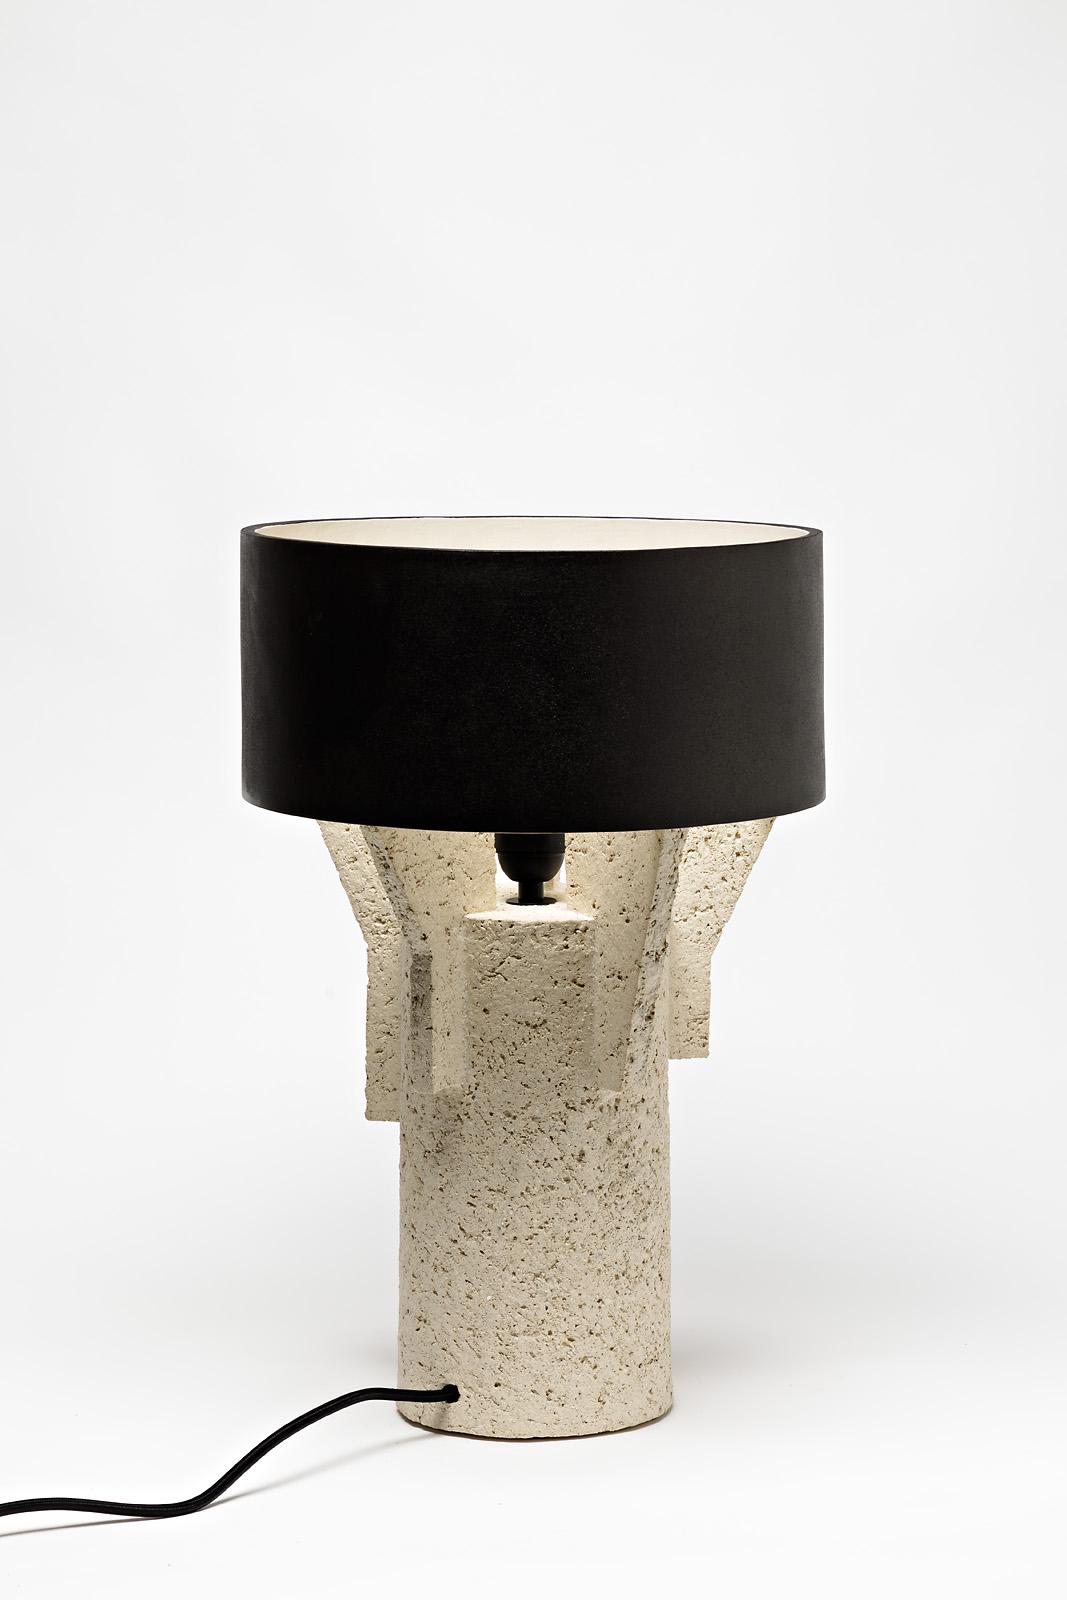 French Ceramic Table Lamp by Denis Castaing with Brown Glaze Decoration, 2019 For Sale